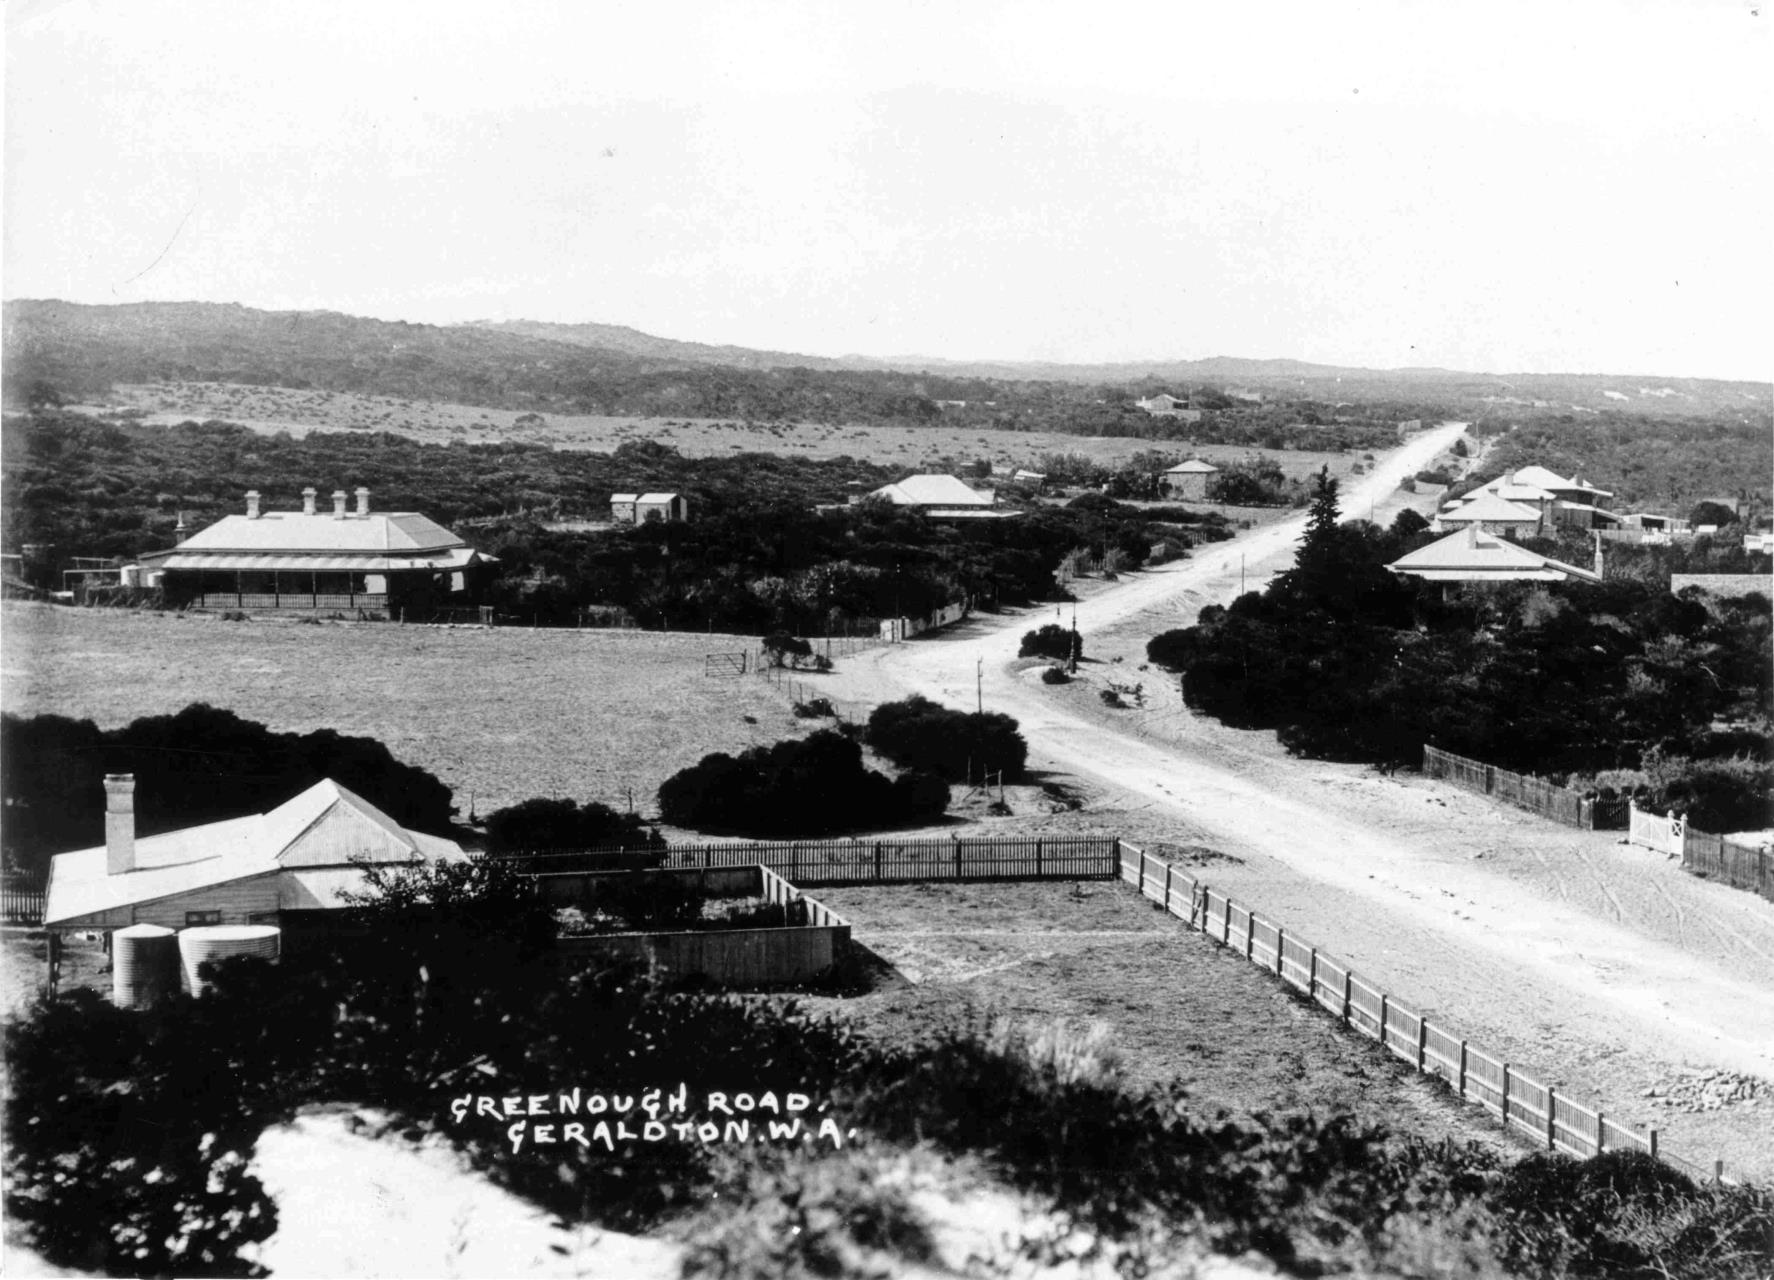 Greenough Road in the 1900s